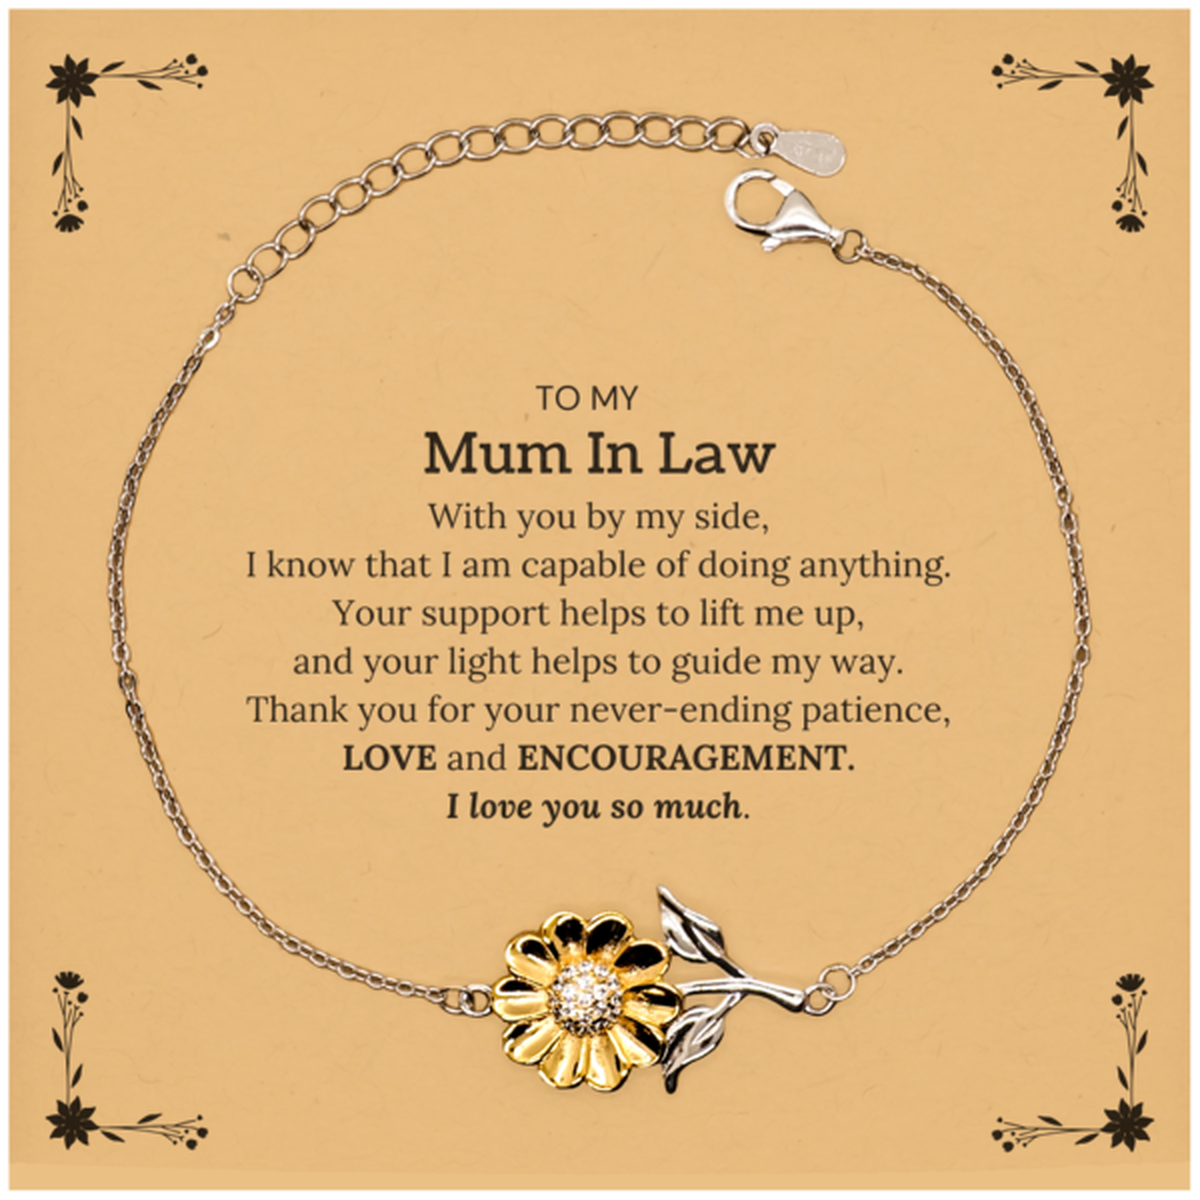 Appreciation Mum In Law  Sunflower Bracelet Gifts, To My Mum In Law  Birthday Christmas Wedding Keepsake Gifts for Mum In Law  With you by my side, I know that I am capable of doing anything. I love you so much